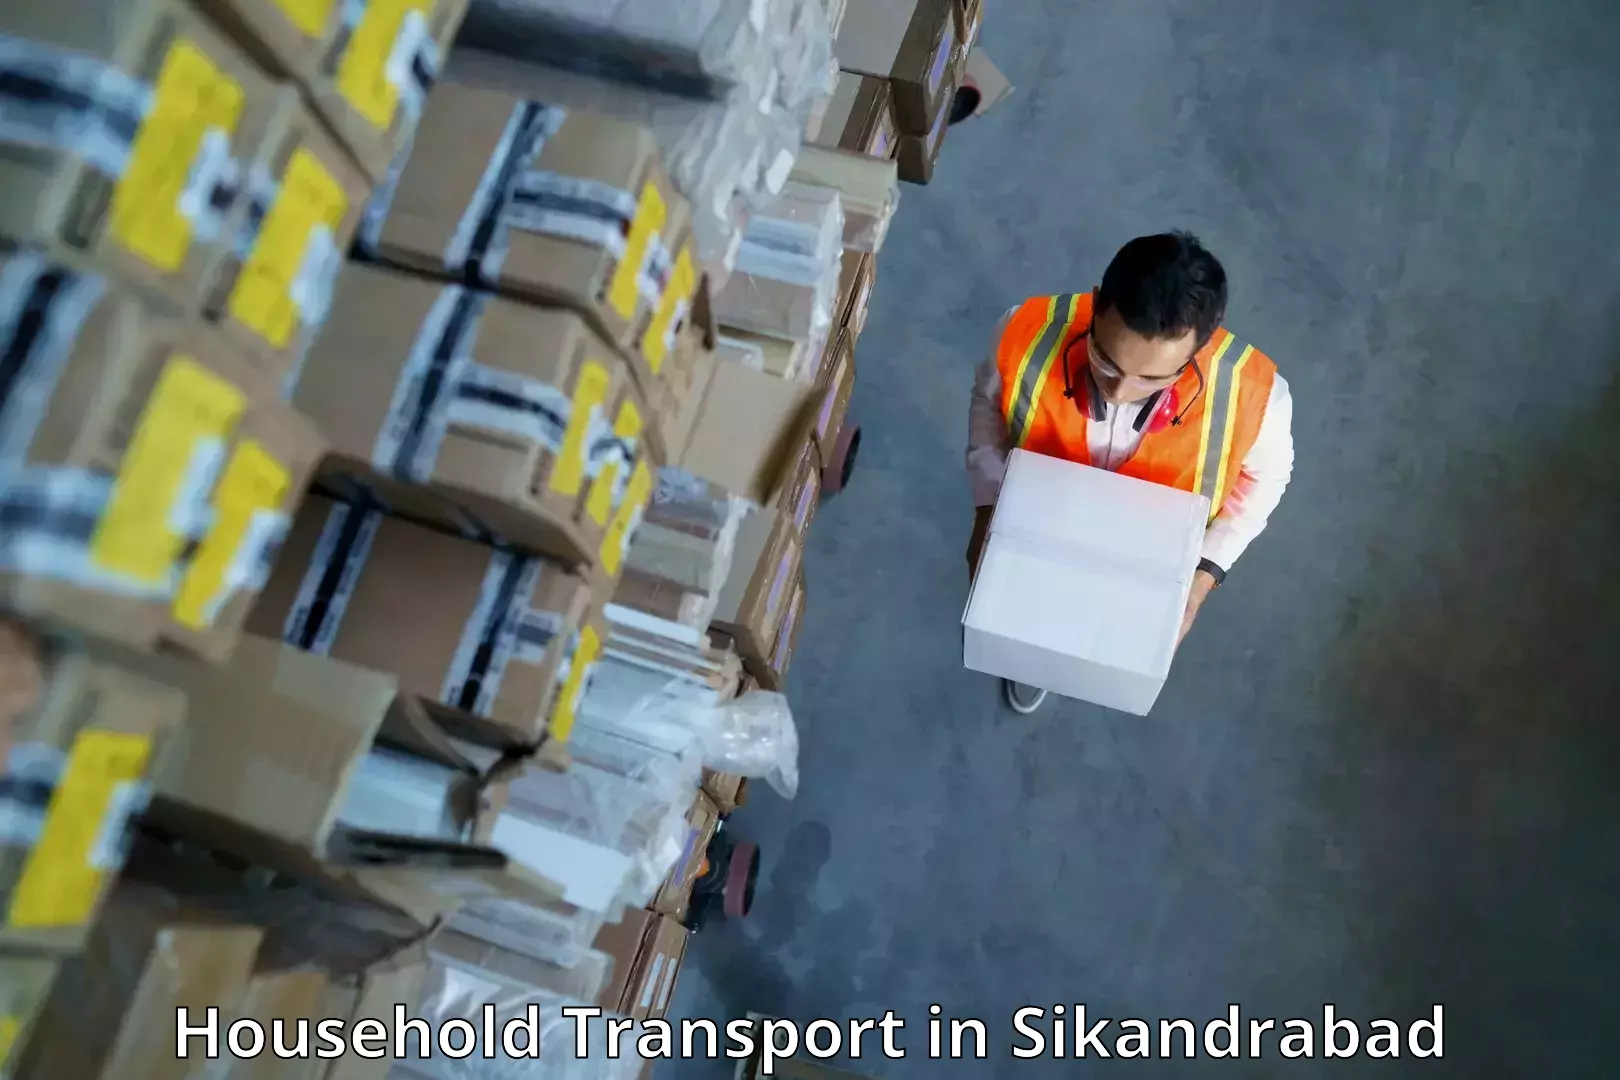 Household goods transport service in Sikandrabad